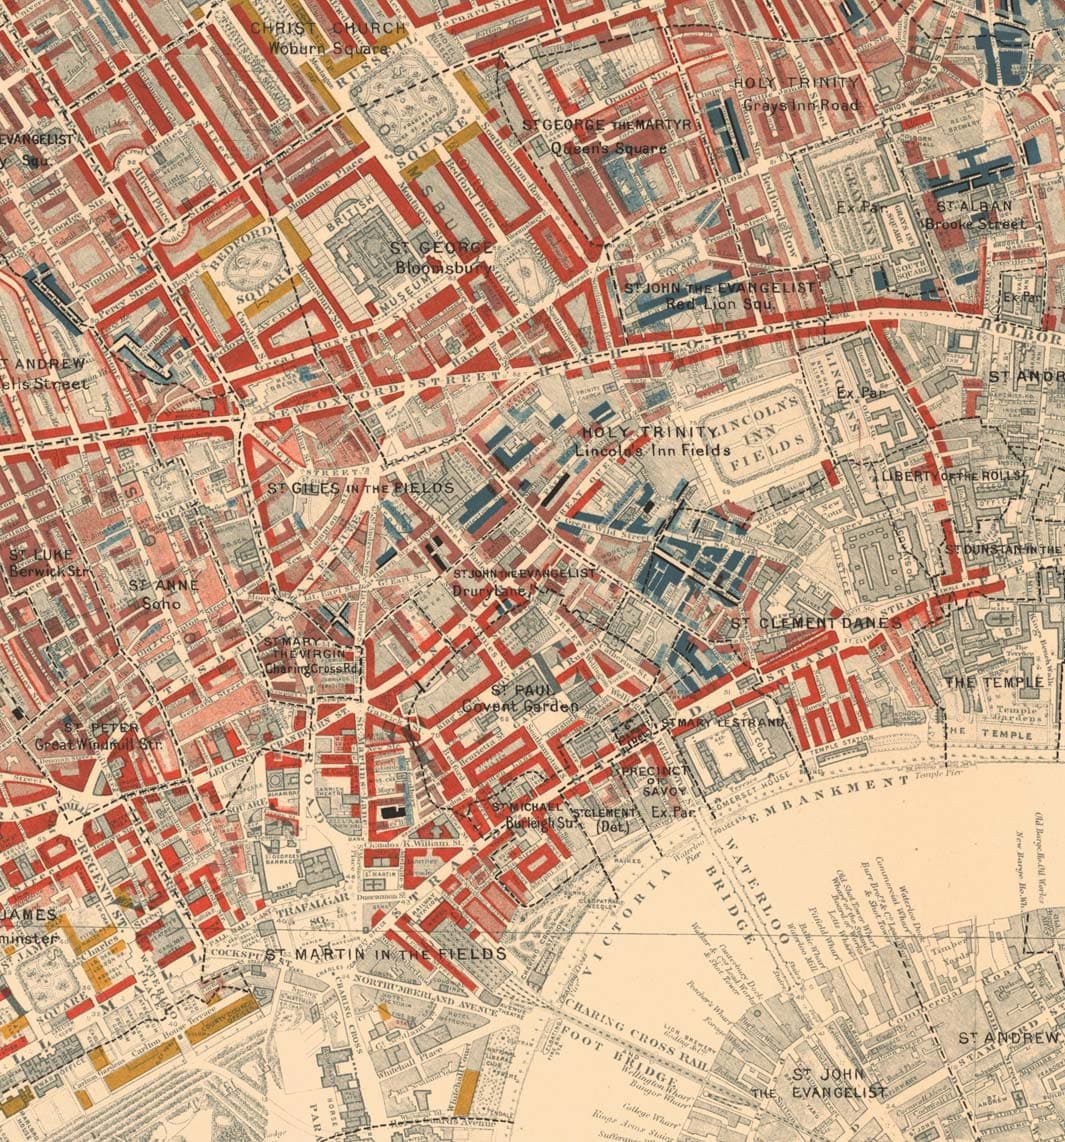 Map of London Poverty 1898-9, West Central District, by Charles Booth - Westminster, Camden, City of London, Islington - W1, WC1, WC2, EC1, N1